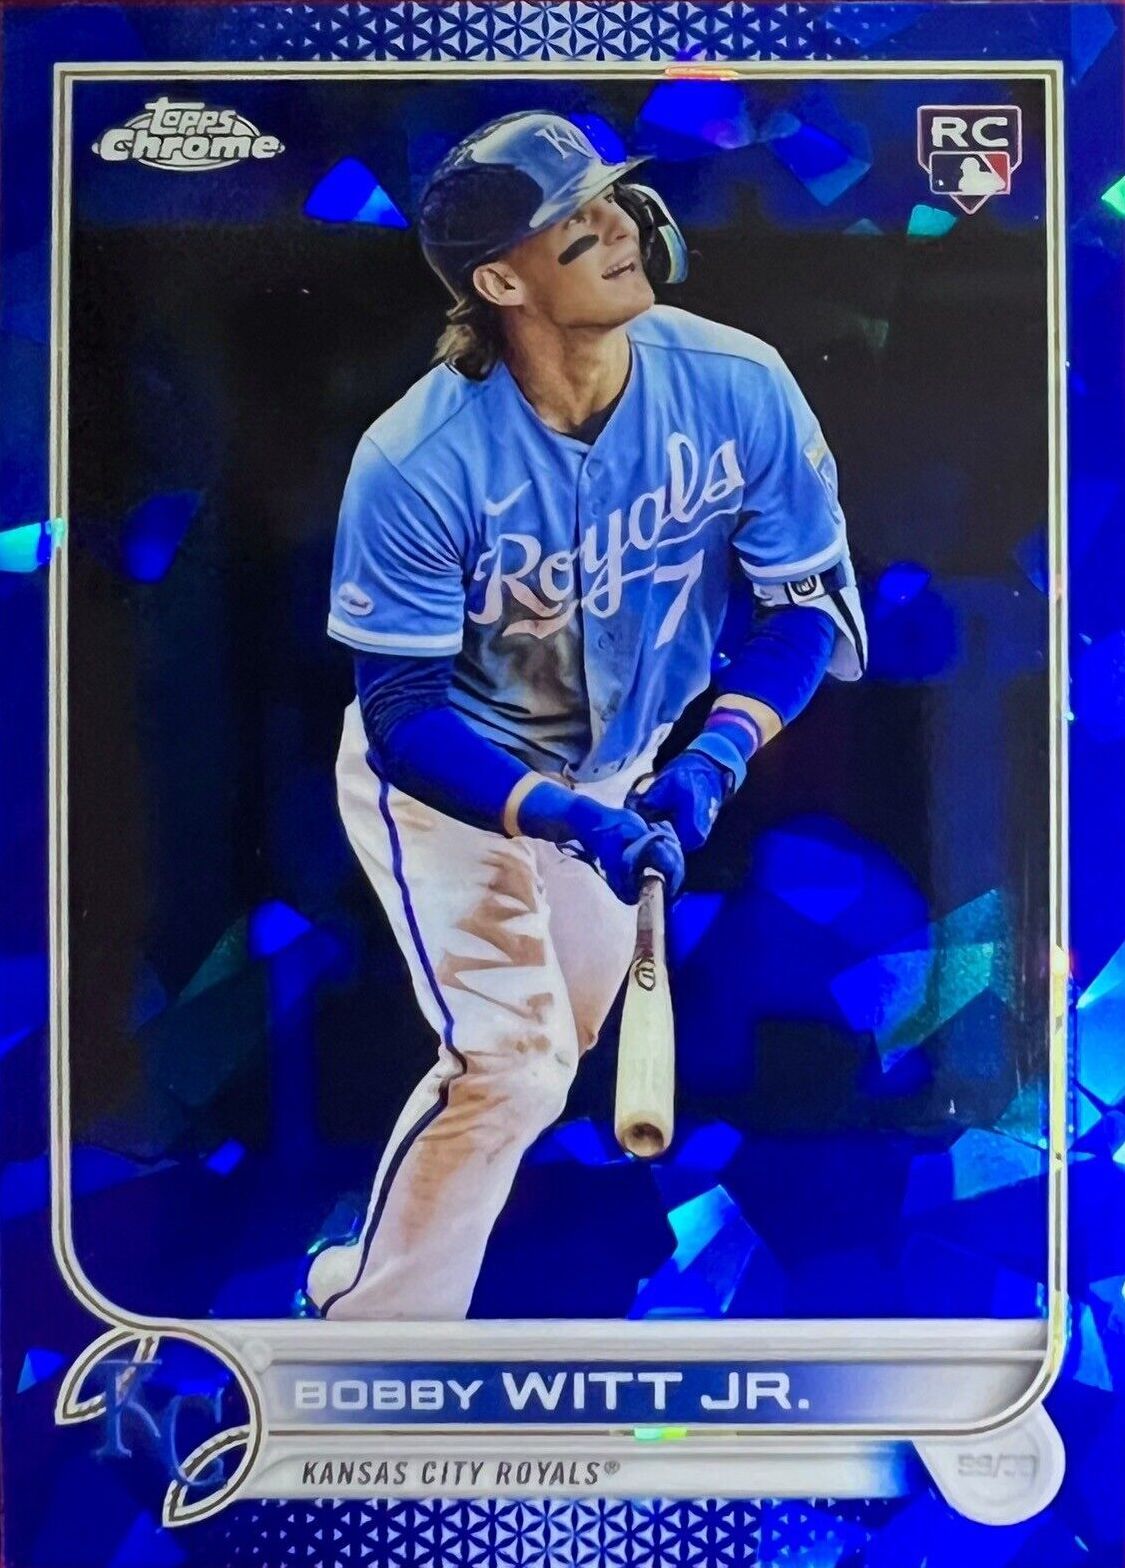 2022 Topps Chrome Update Sapphire Released